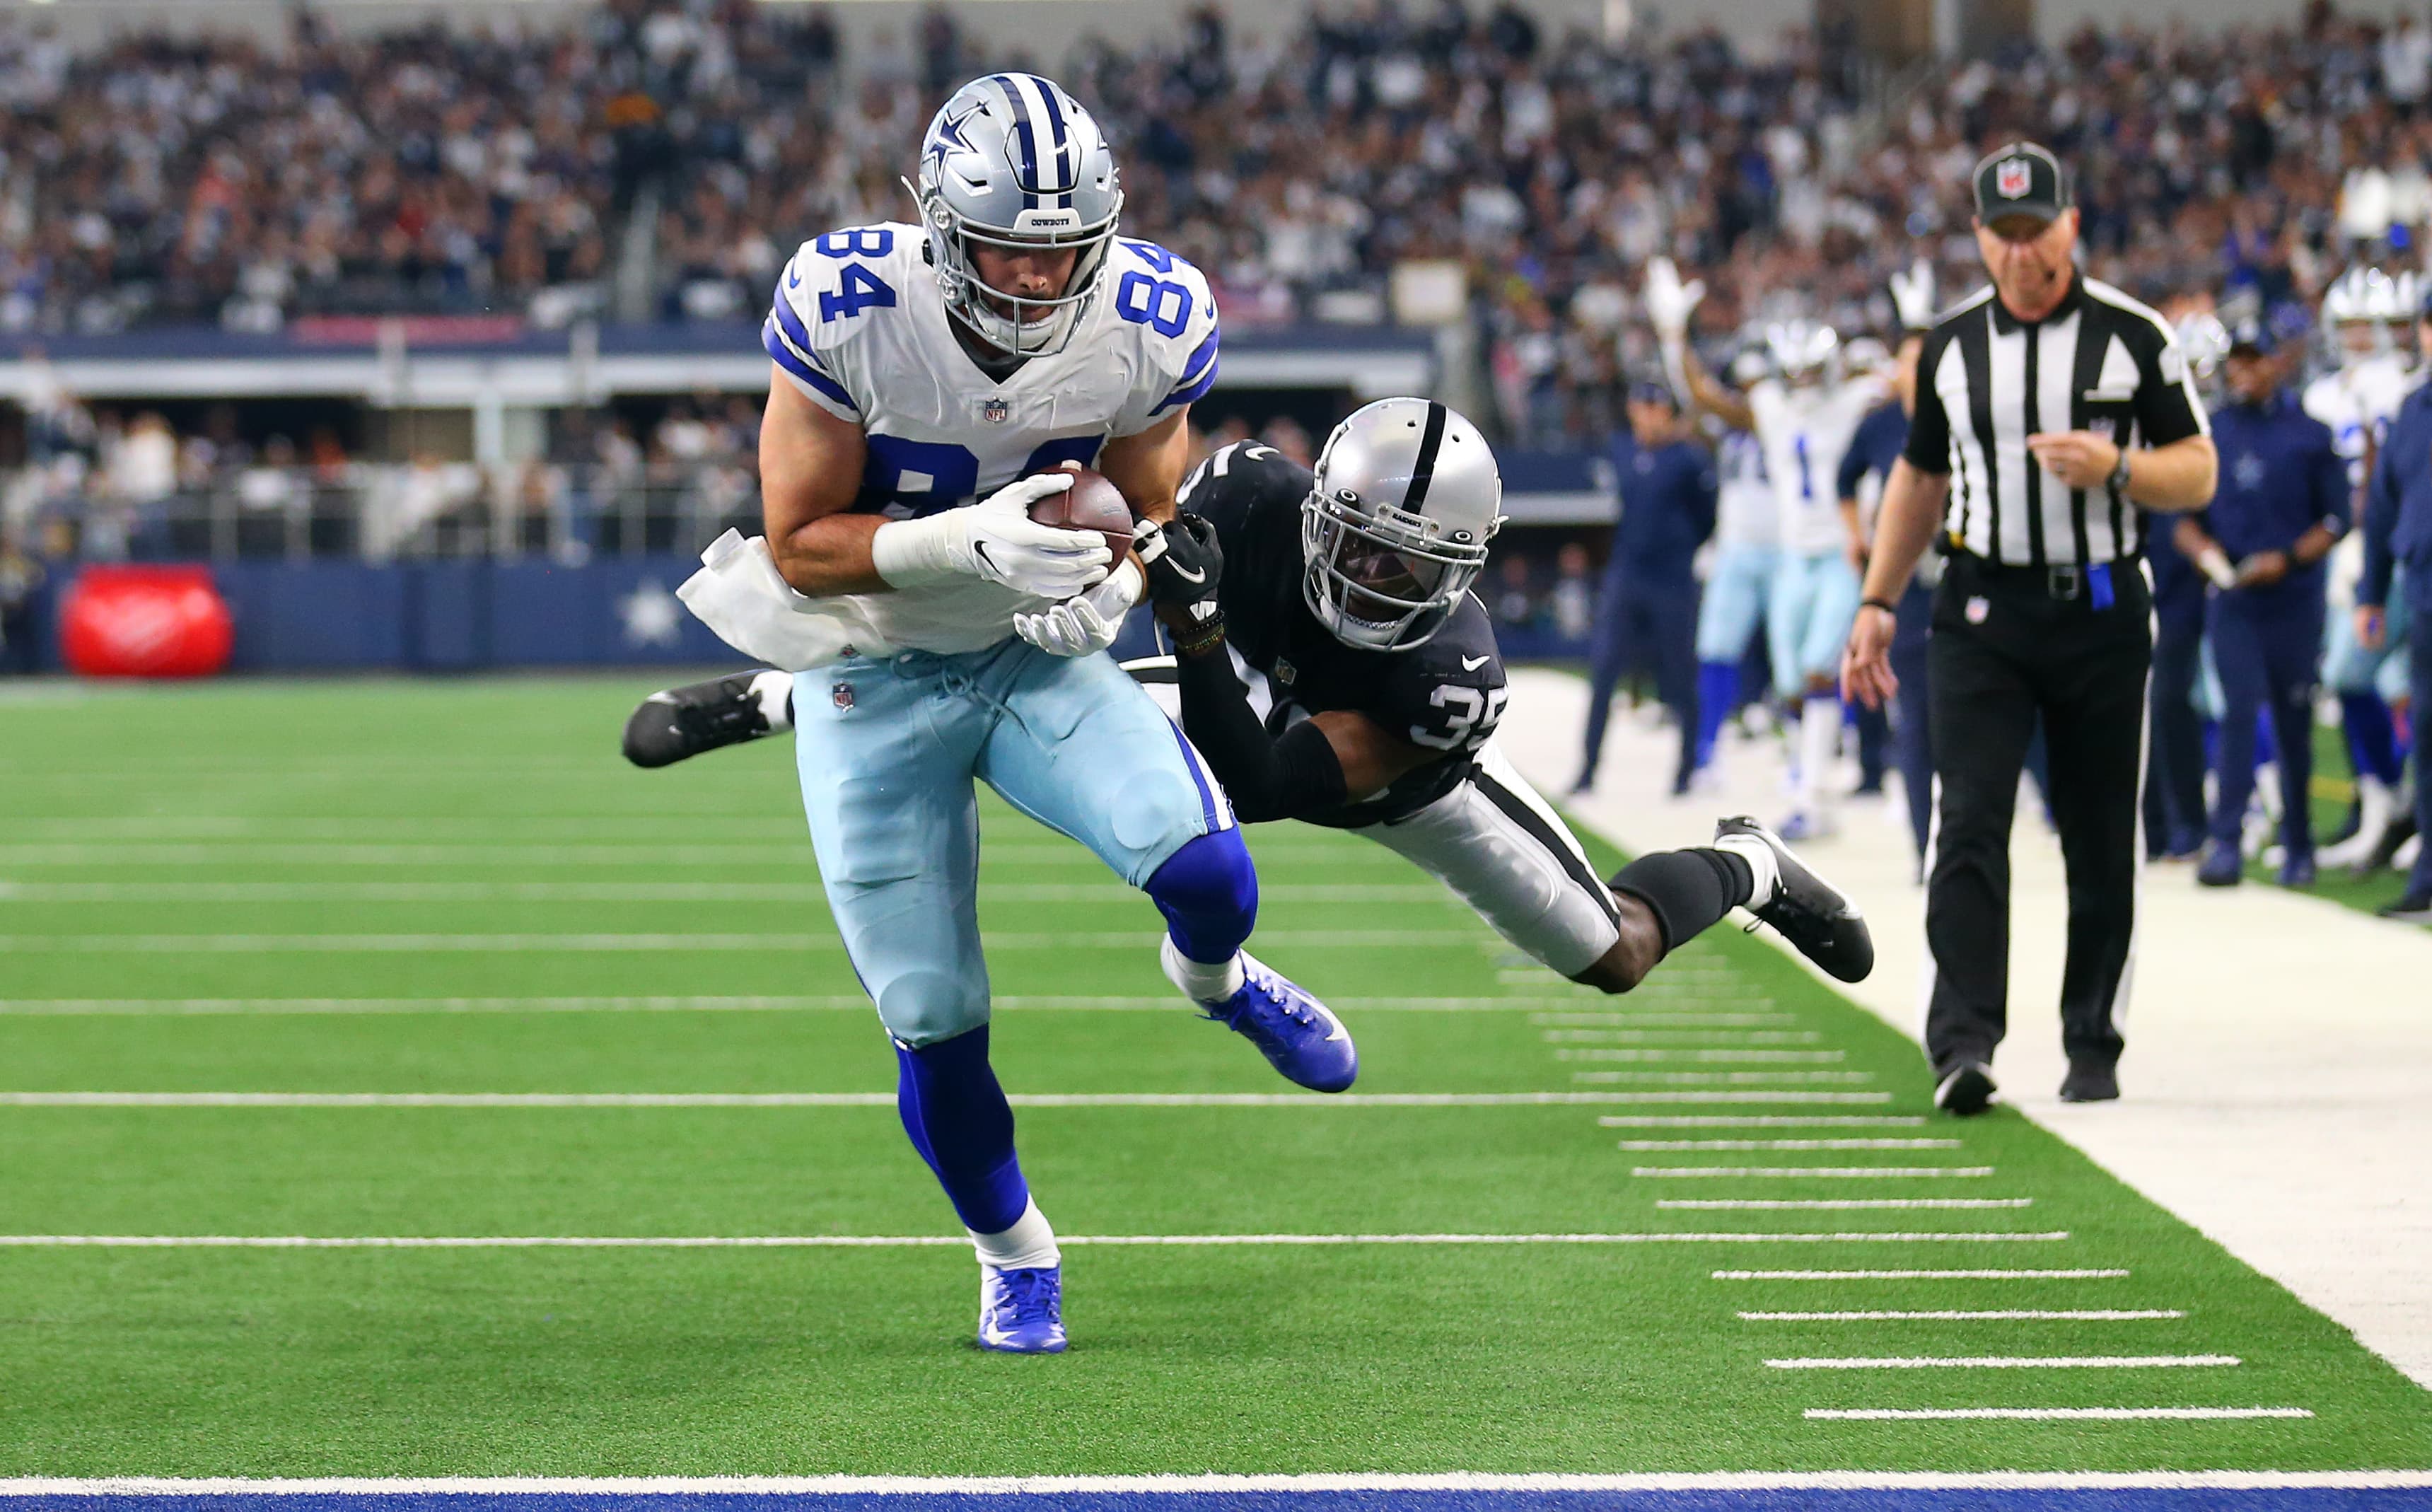 Do the Dallas Cowboys play NFL football today on Thanksgiving? - CBS News